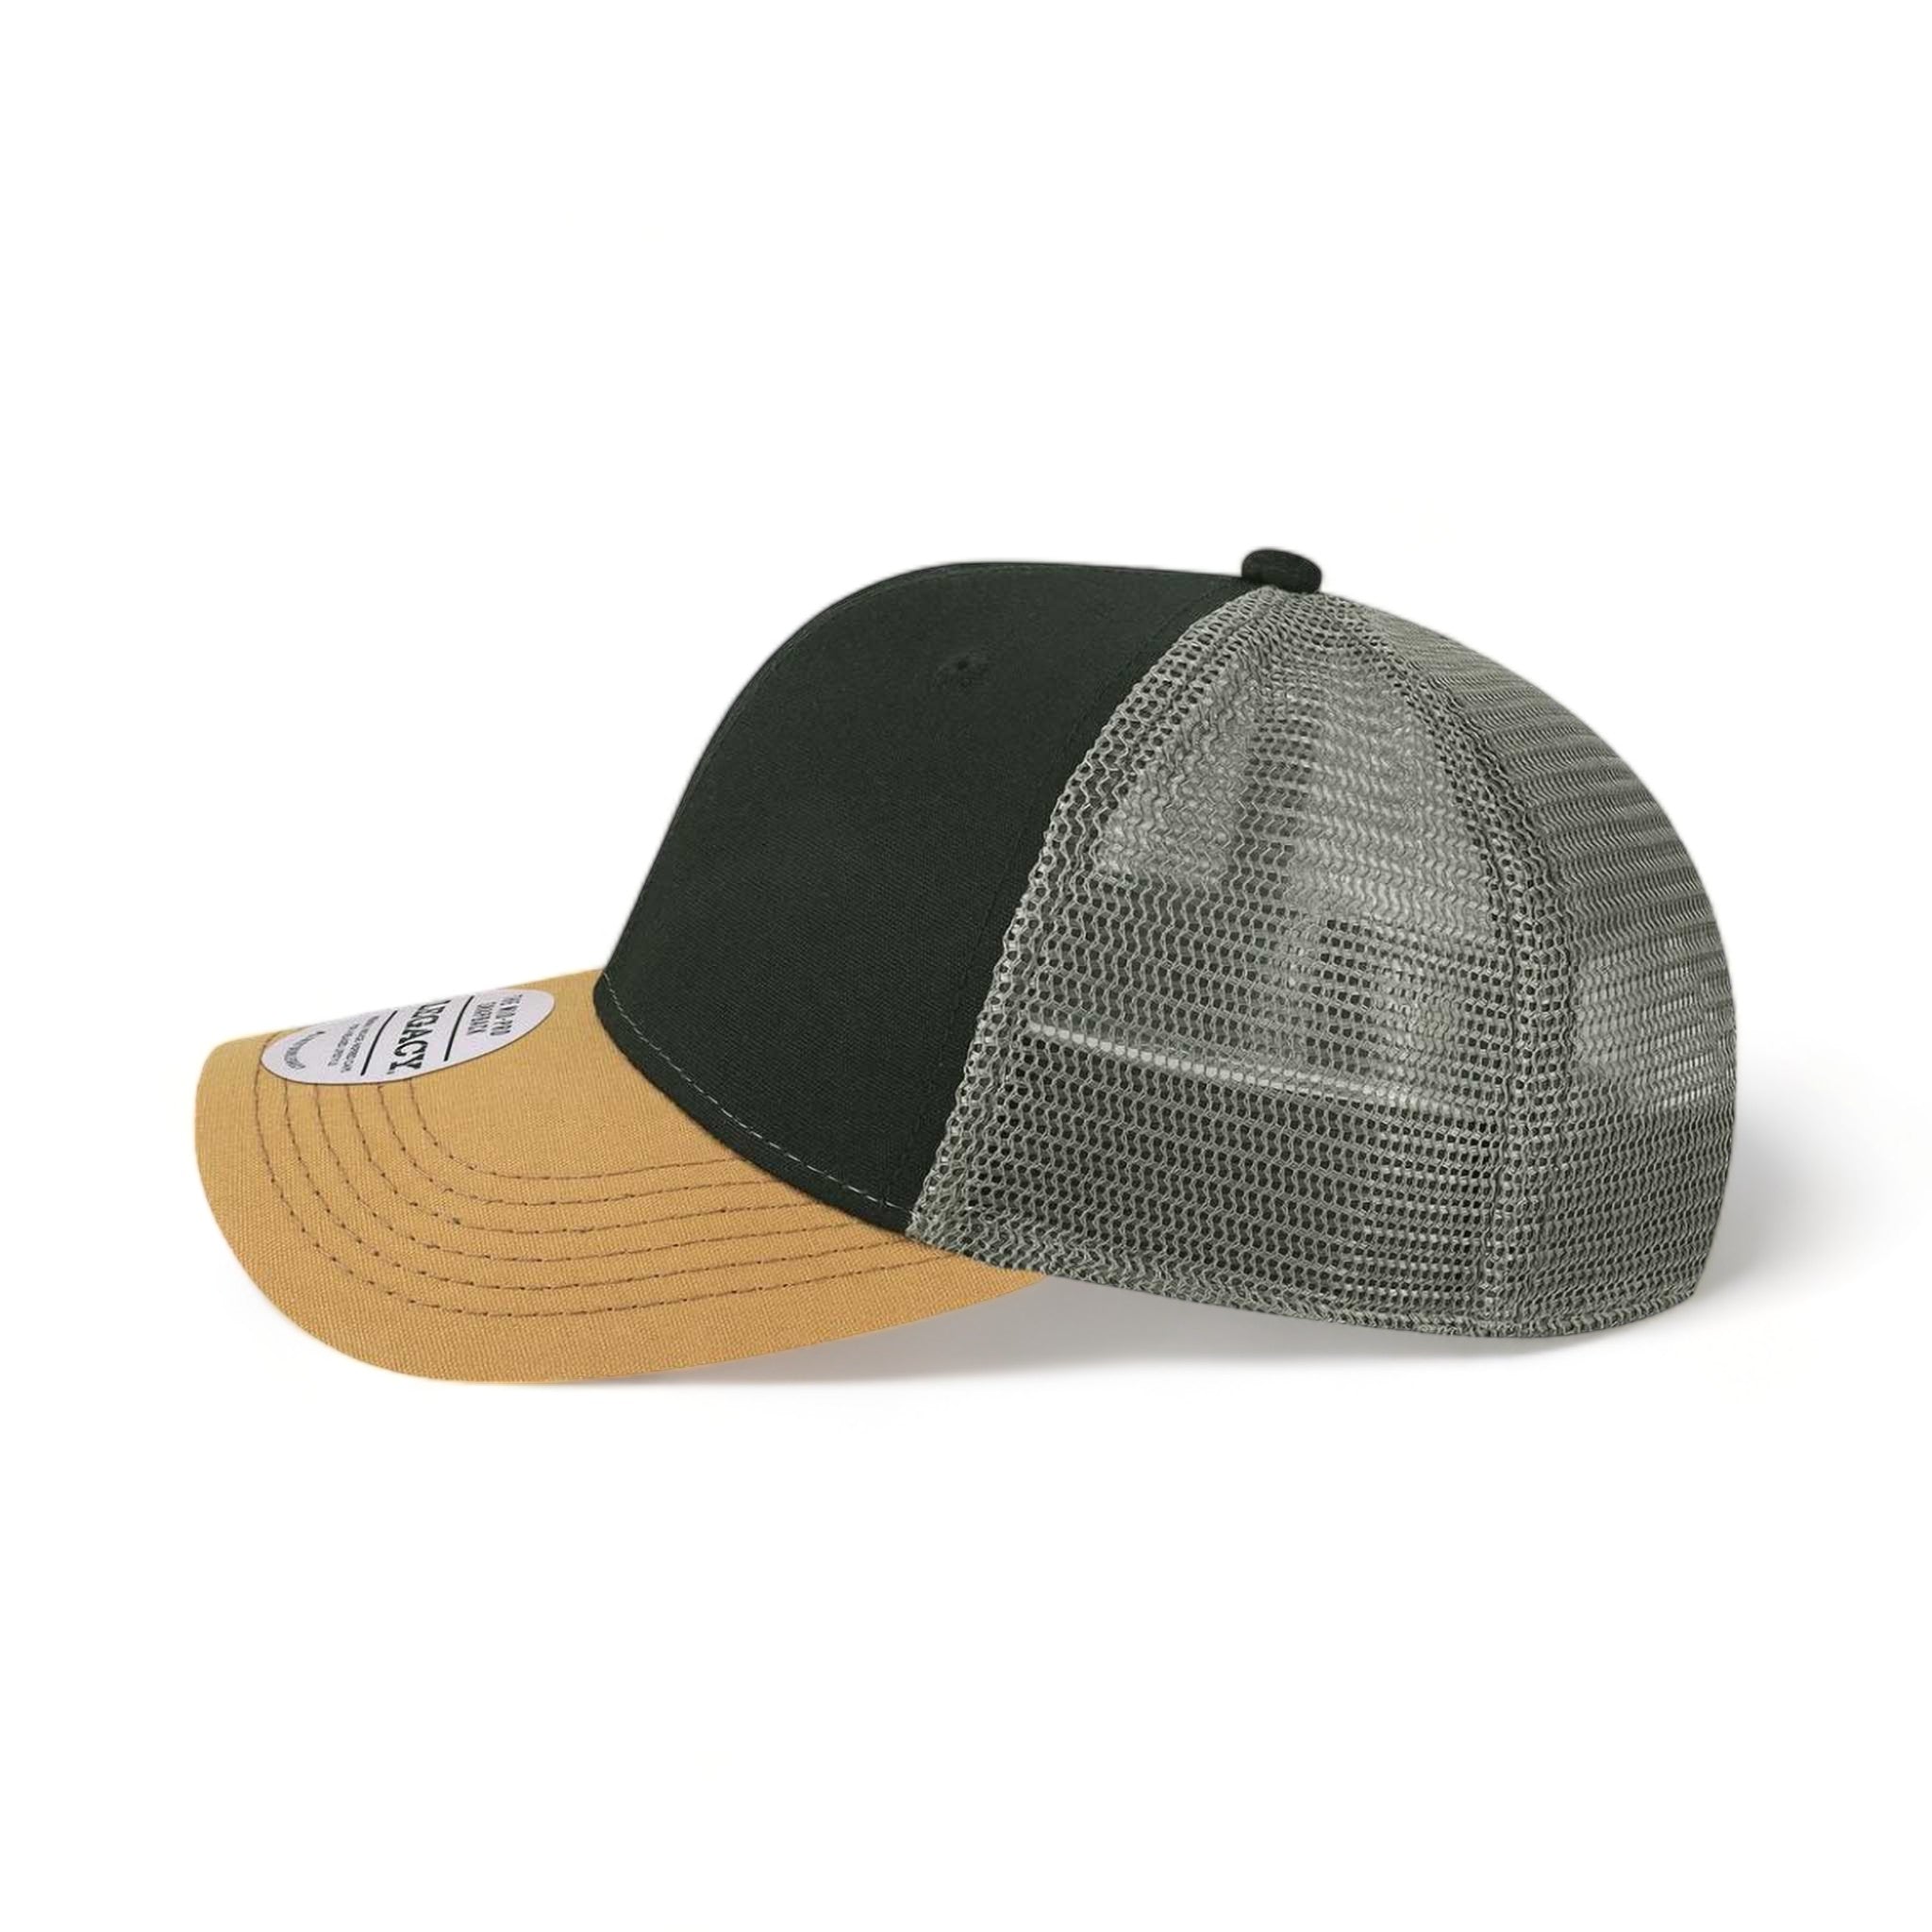 Side view of LEGACY MPS custom hat in black, caramel and dark grey